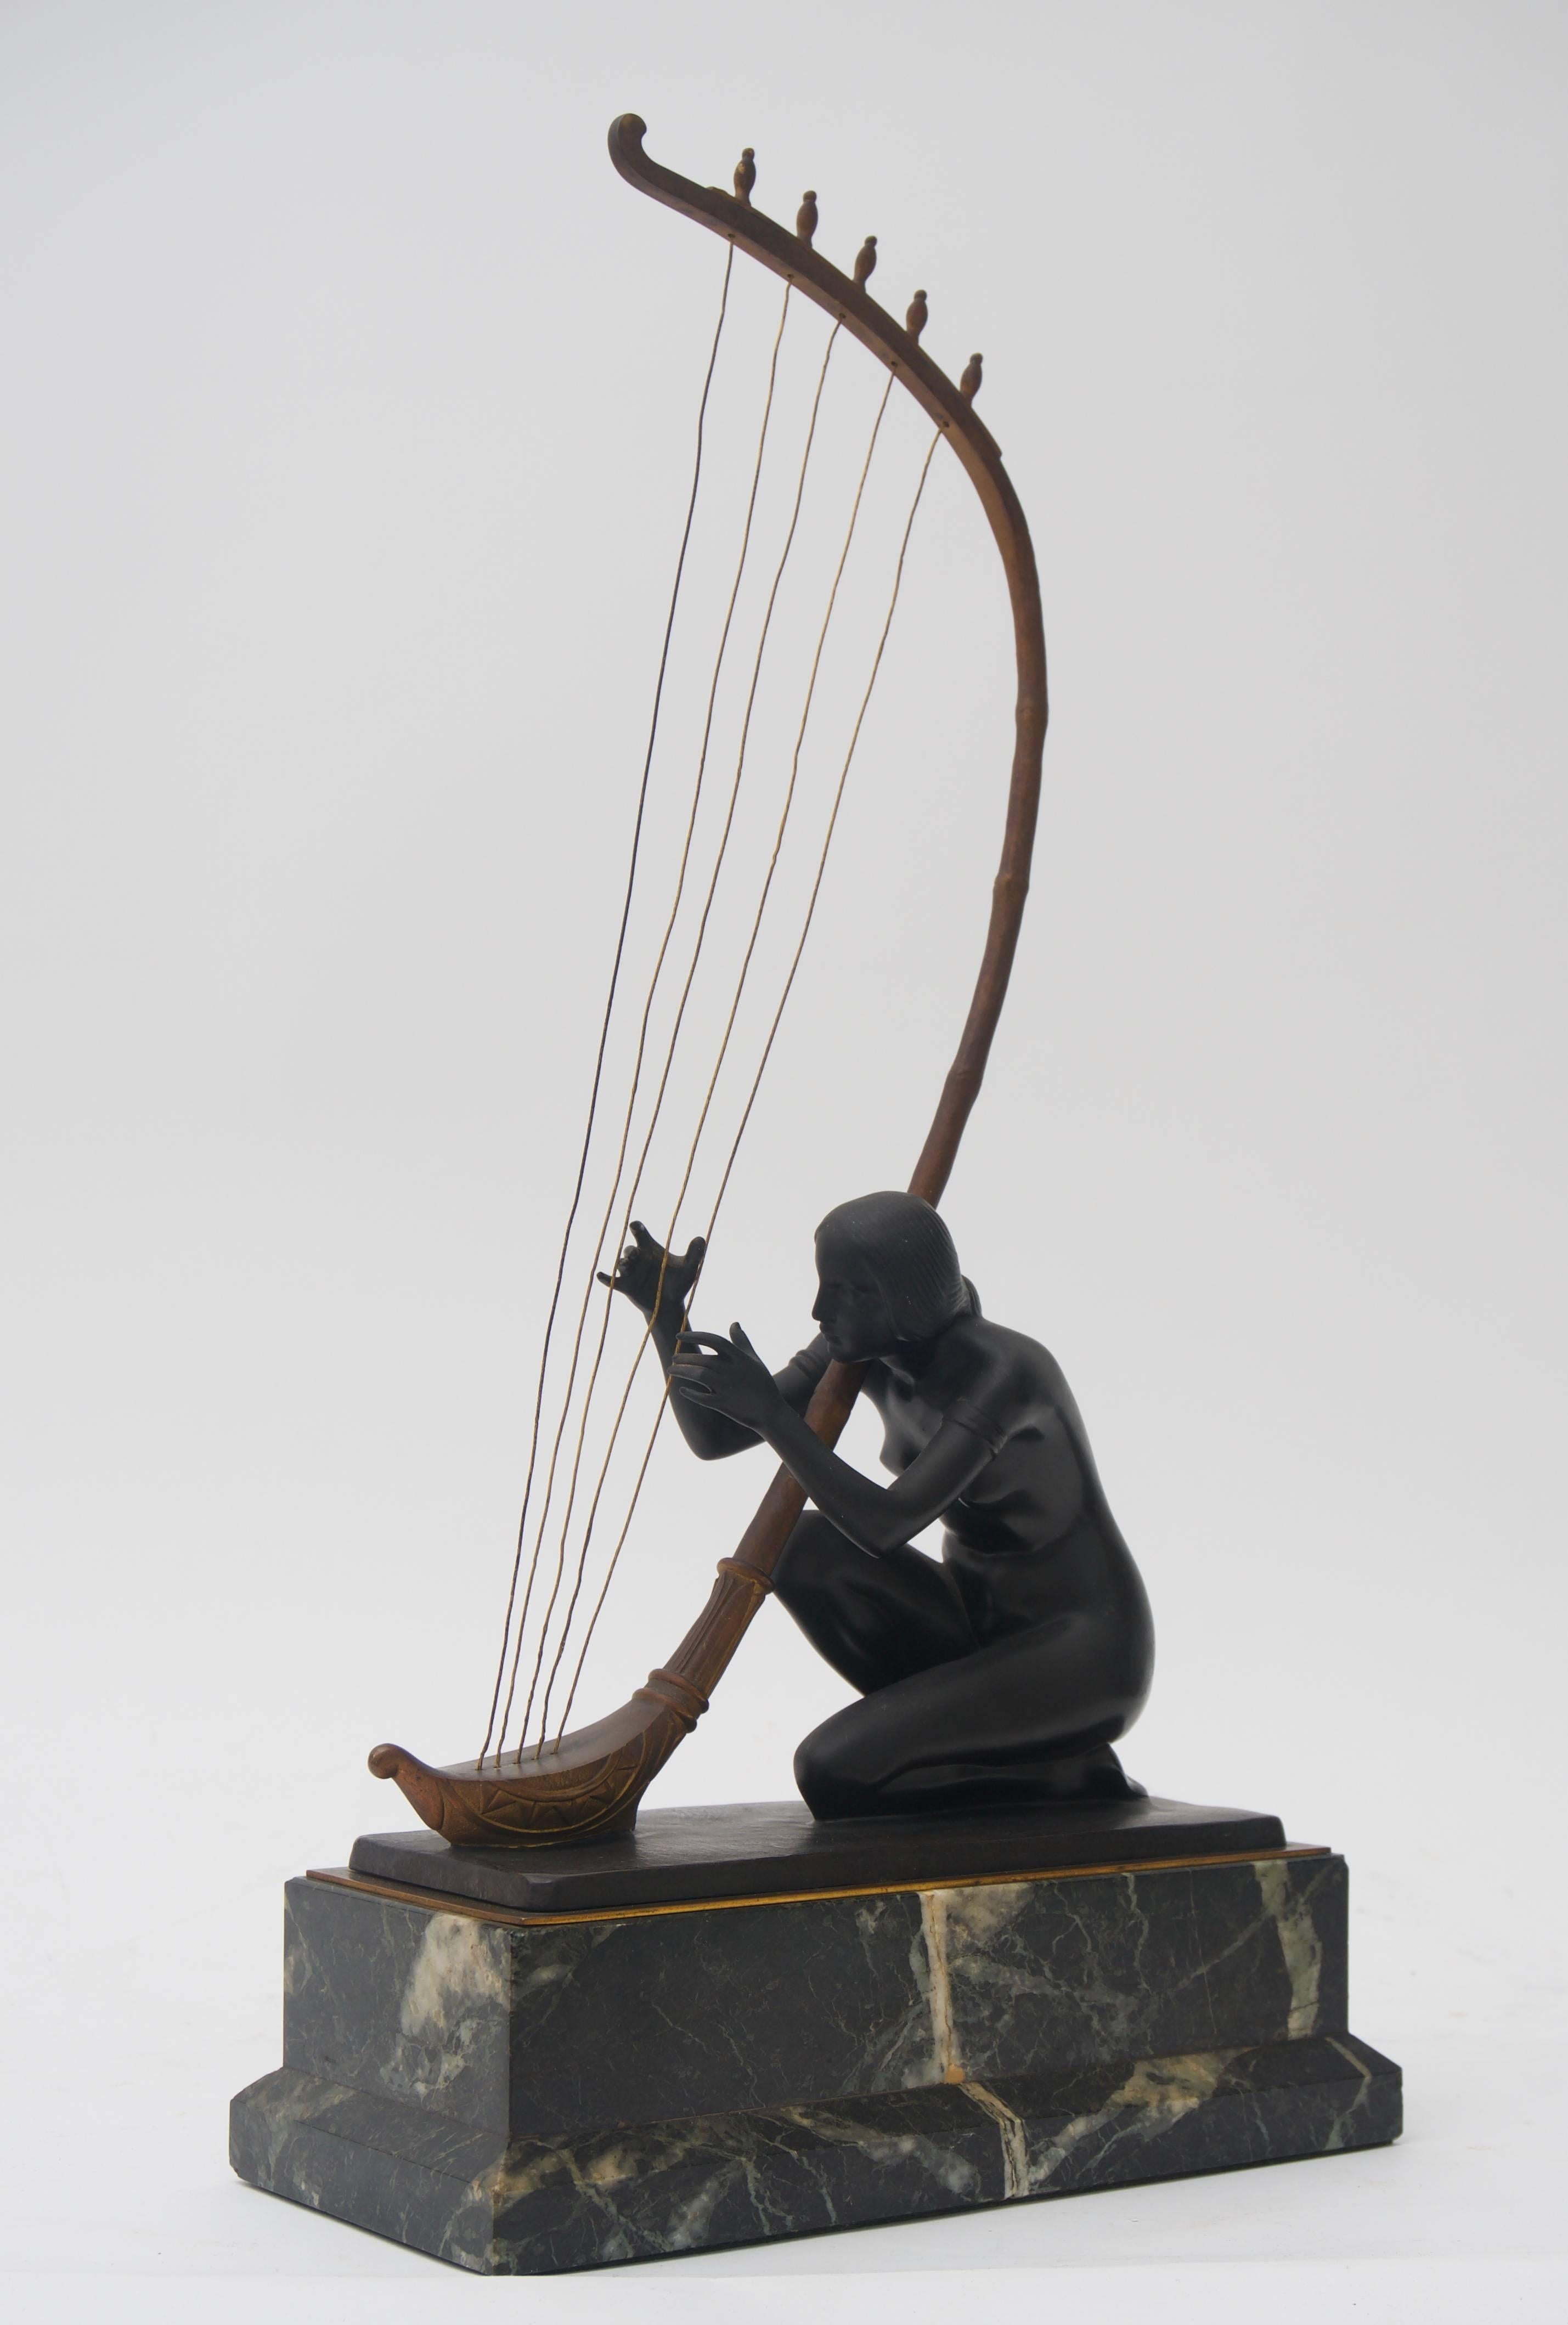 This piece was acquired from a Palm Beach collection and is by the Austrian sculptor Hans Muller. Here Muller has captured a nude maiden playing a stringed instrument as to beckon us with an alluring sound and memories.

This piece has tones of